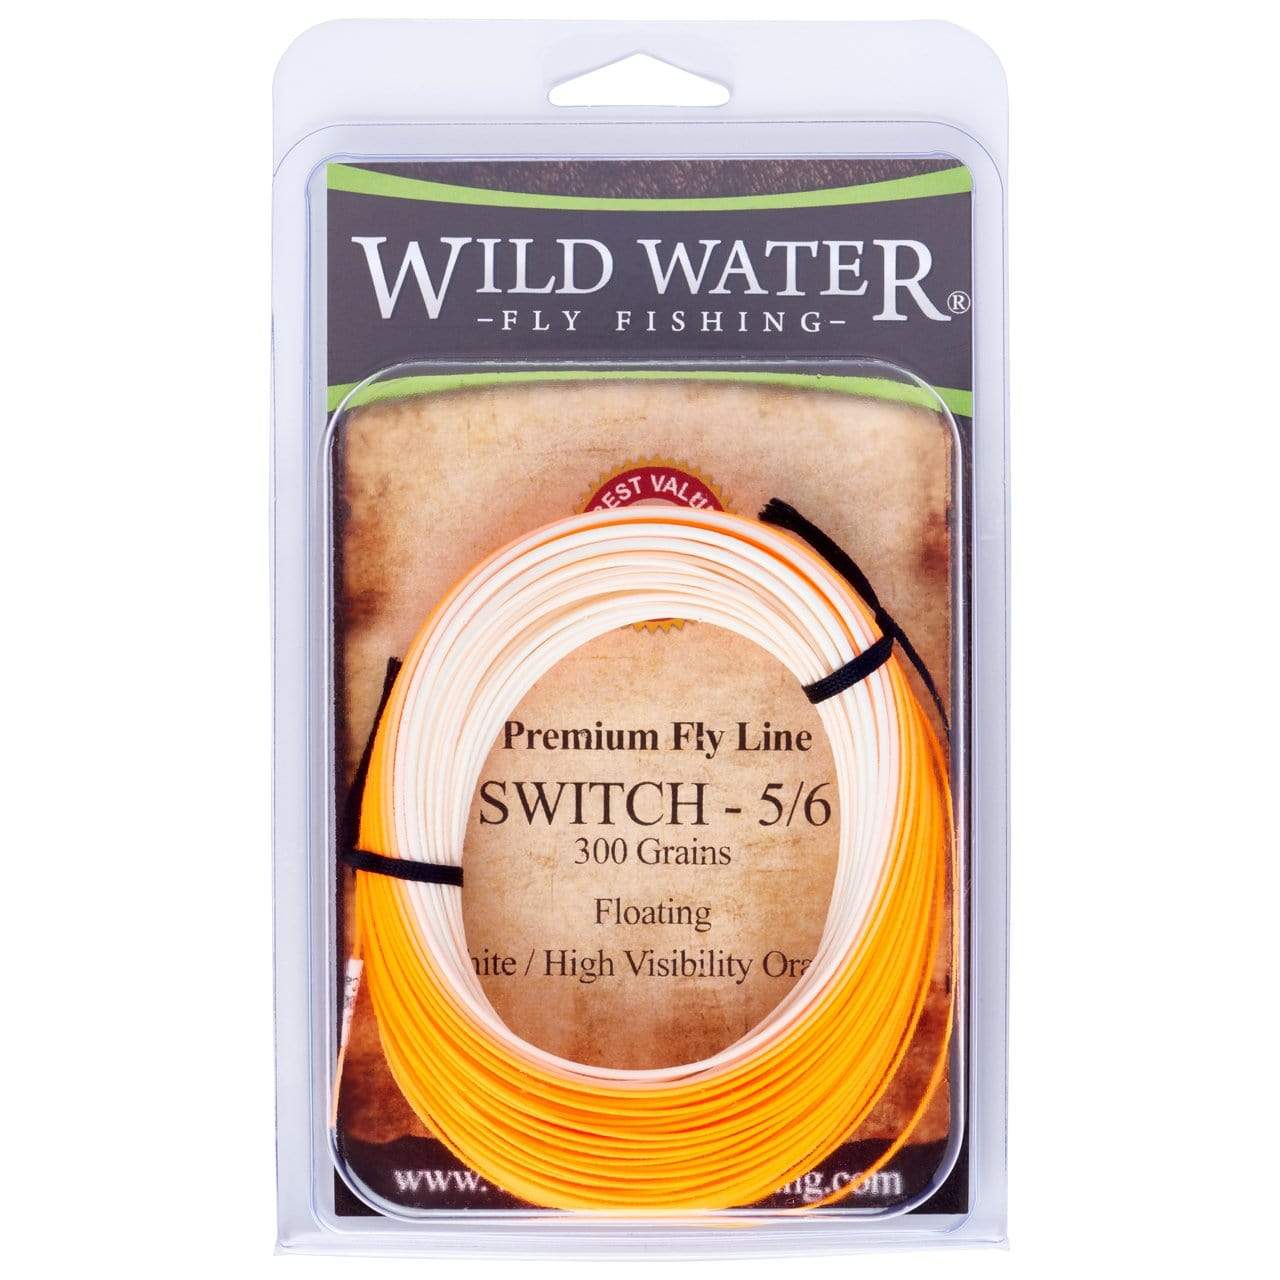 Wild Water Fly Fishing 5/6F Switch Line, 300 grains